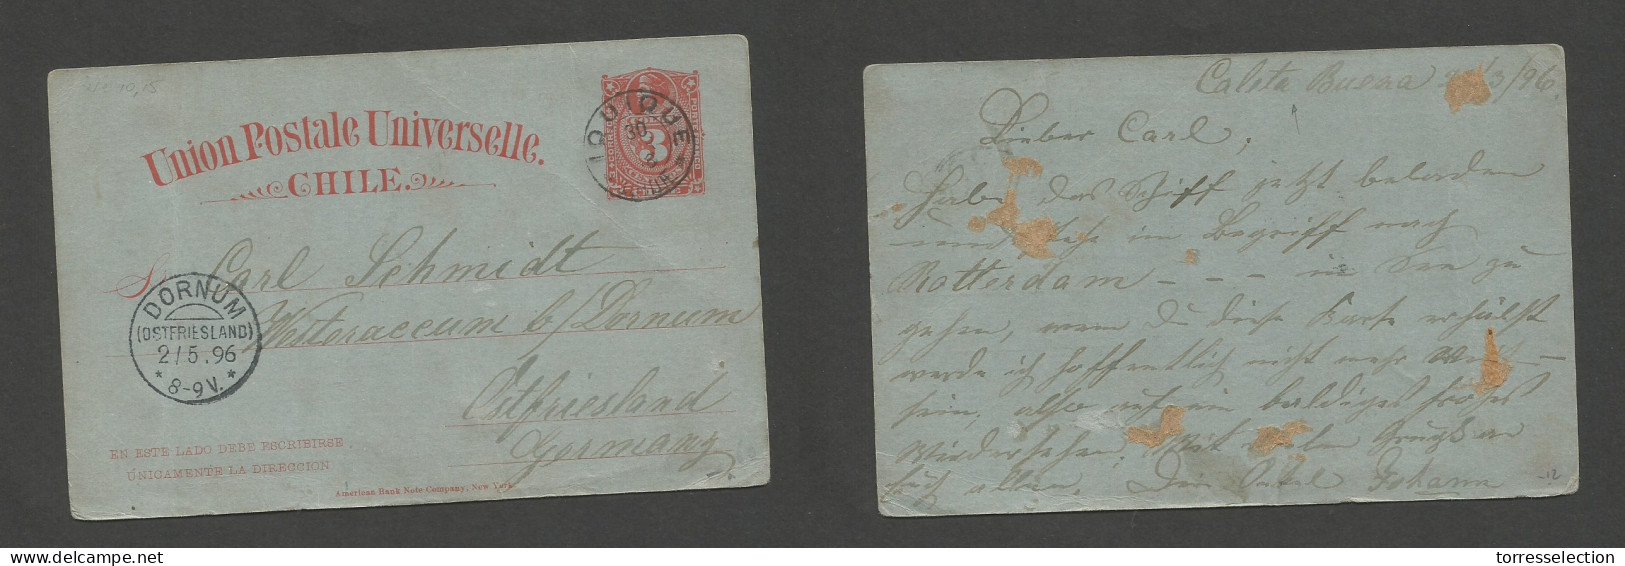 CHILE - Stationery. 1896 (22 March) Caleta Buena - Germany, Dorrum (2 May) Via Iquique (30 March) 3c Red / Bluish Stat C - Chile